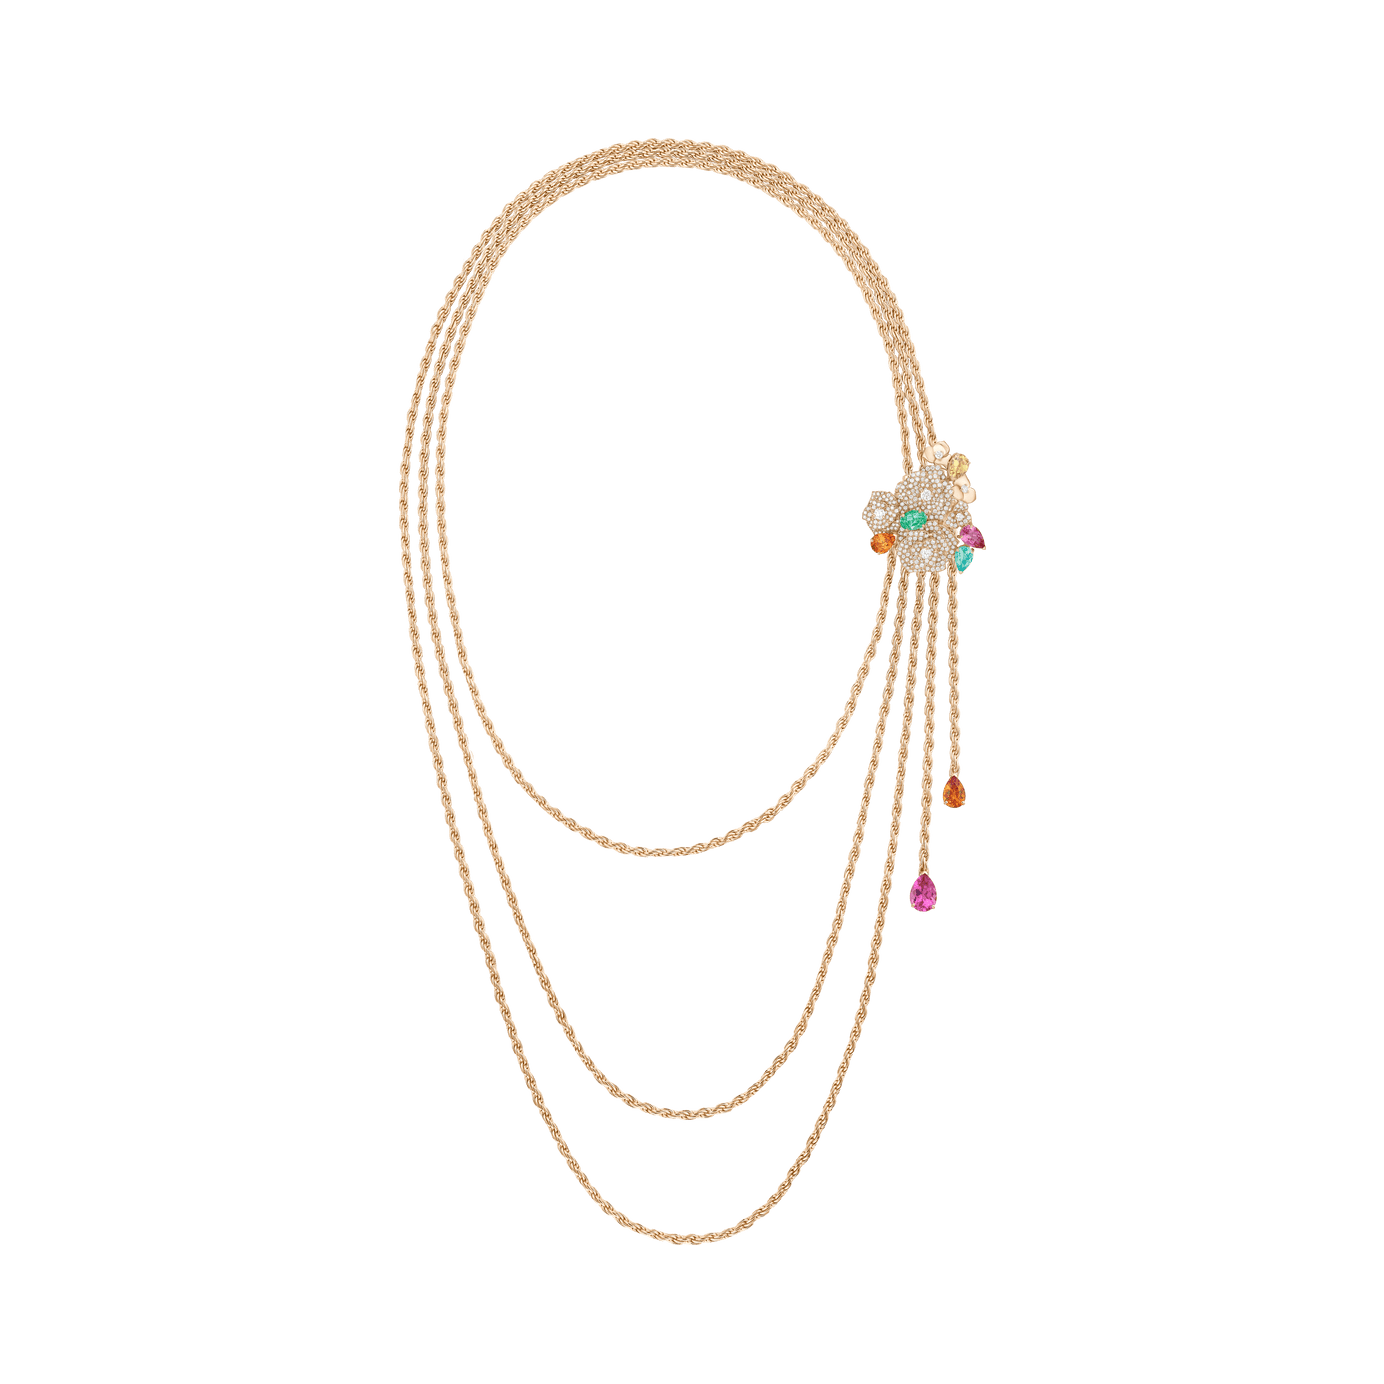 Lot 37: Ladies Piaget High Jewelry Necklace Set